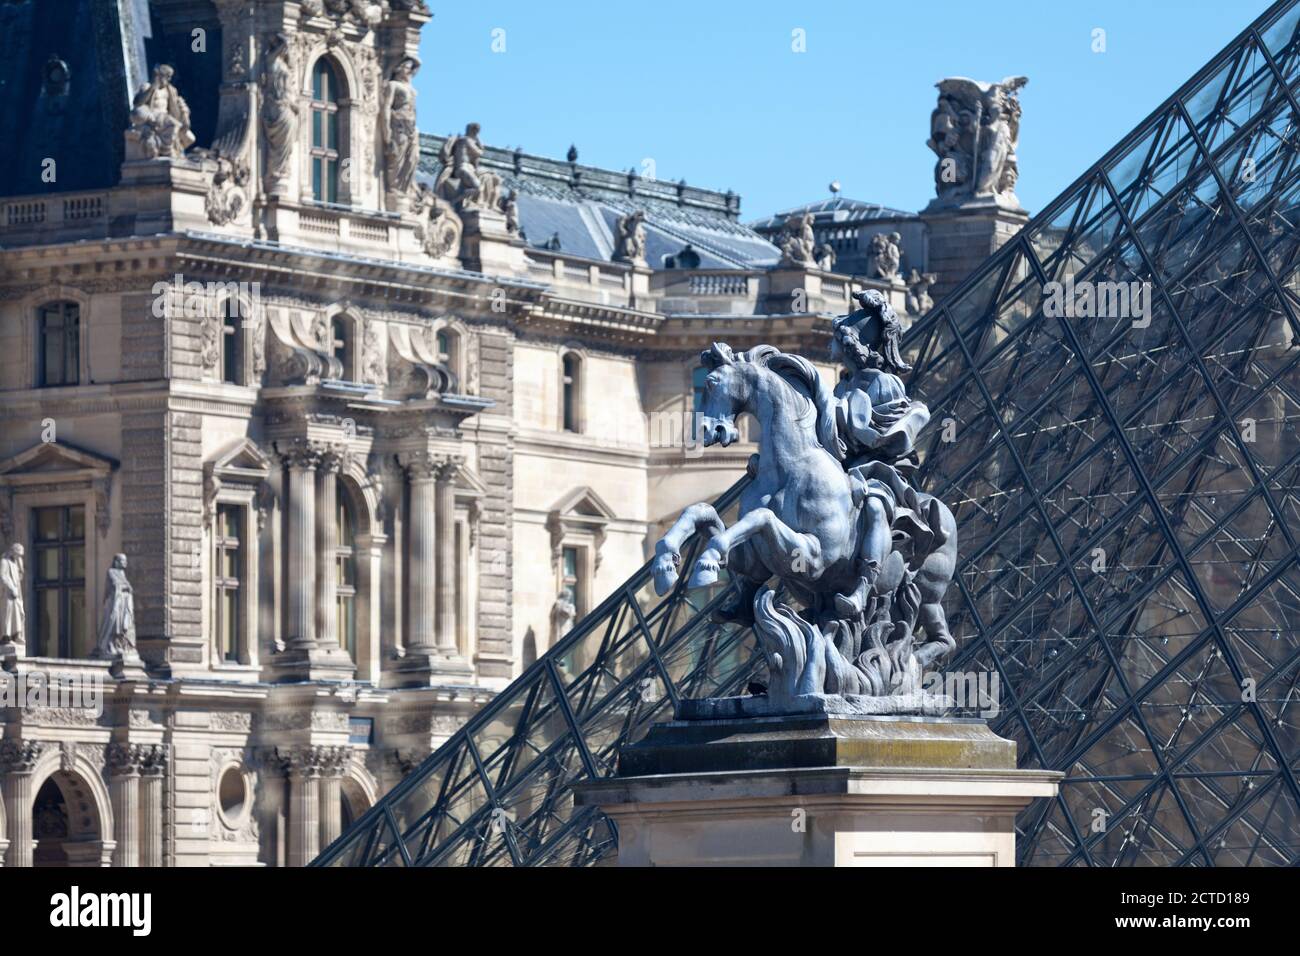 Paris, France - September 07 2016: Copy of the equestrian statue of Louis XIV of France in the guise of Marcus Curtius, produced by Bernini and Franço Stock Photo